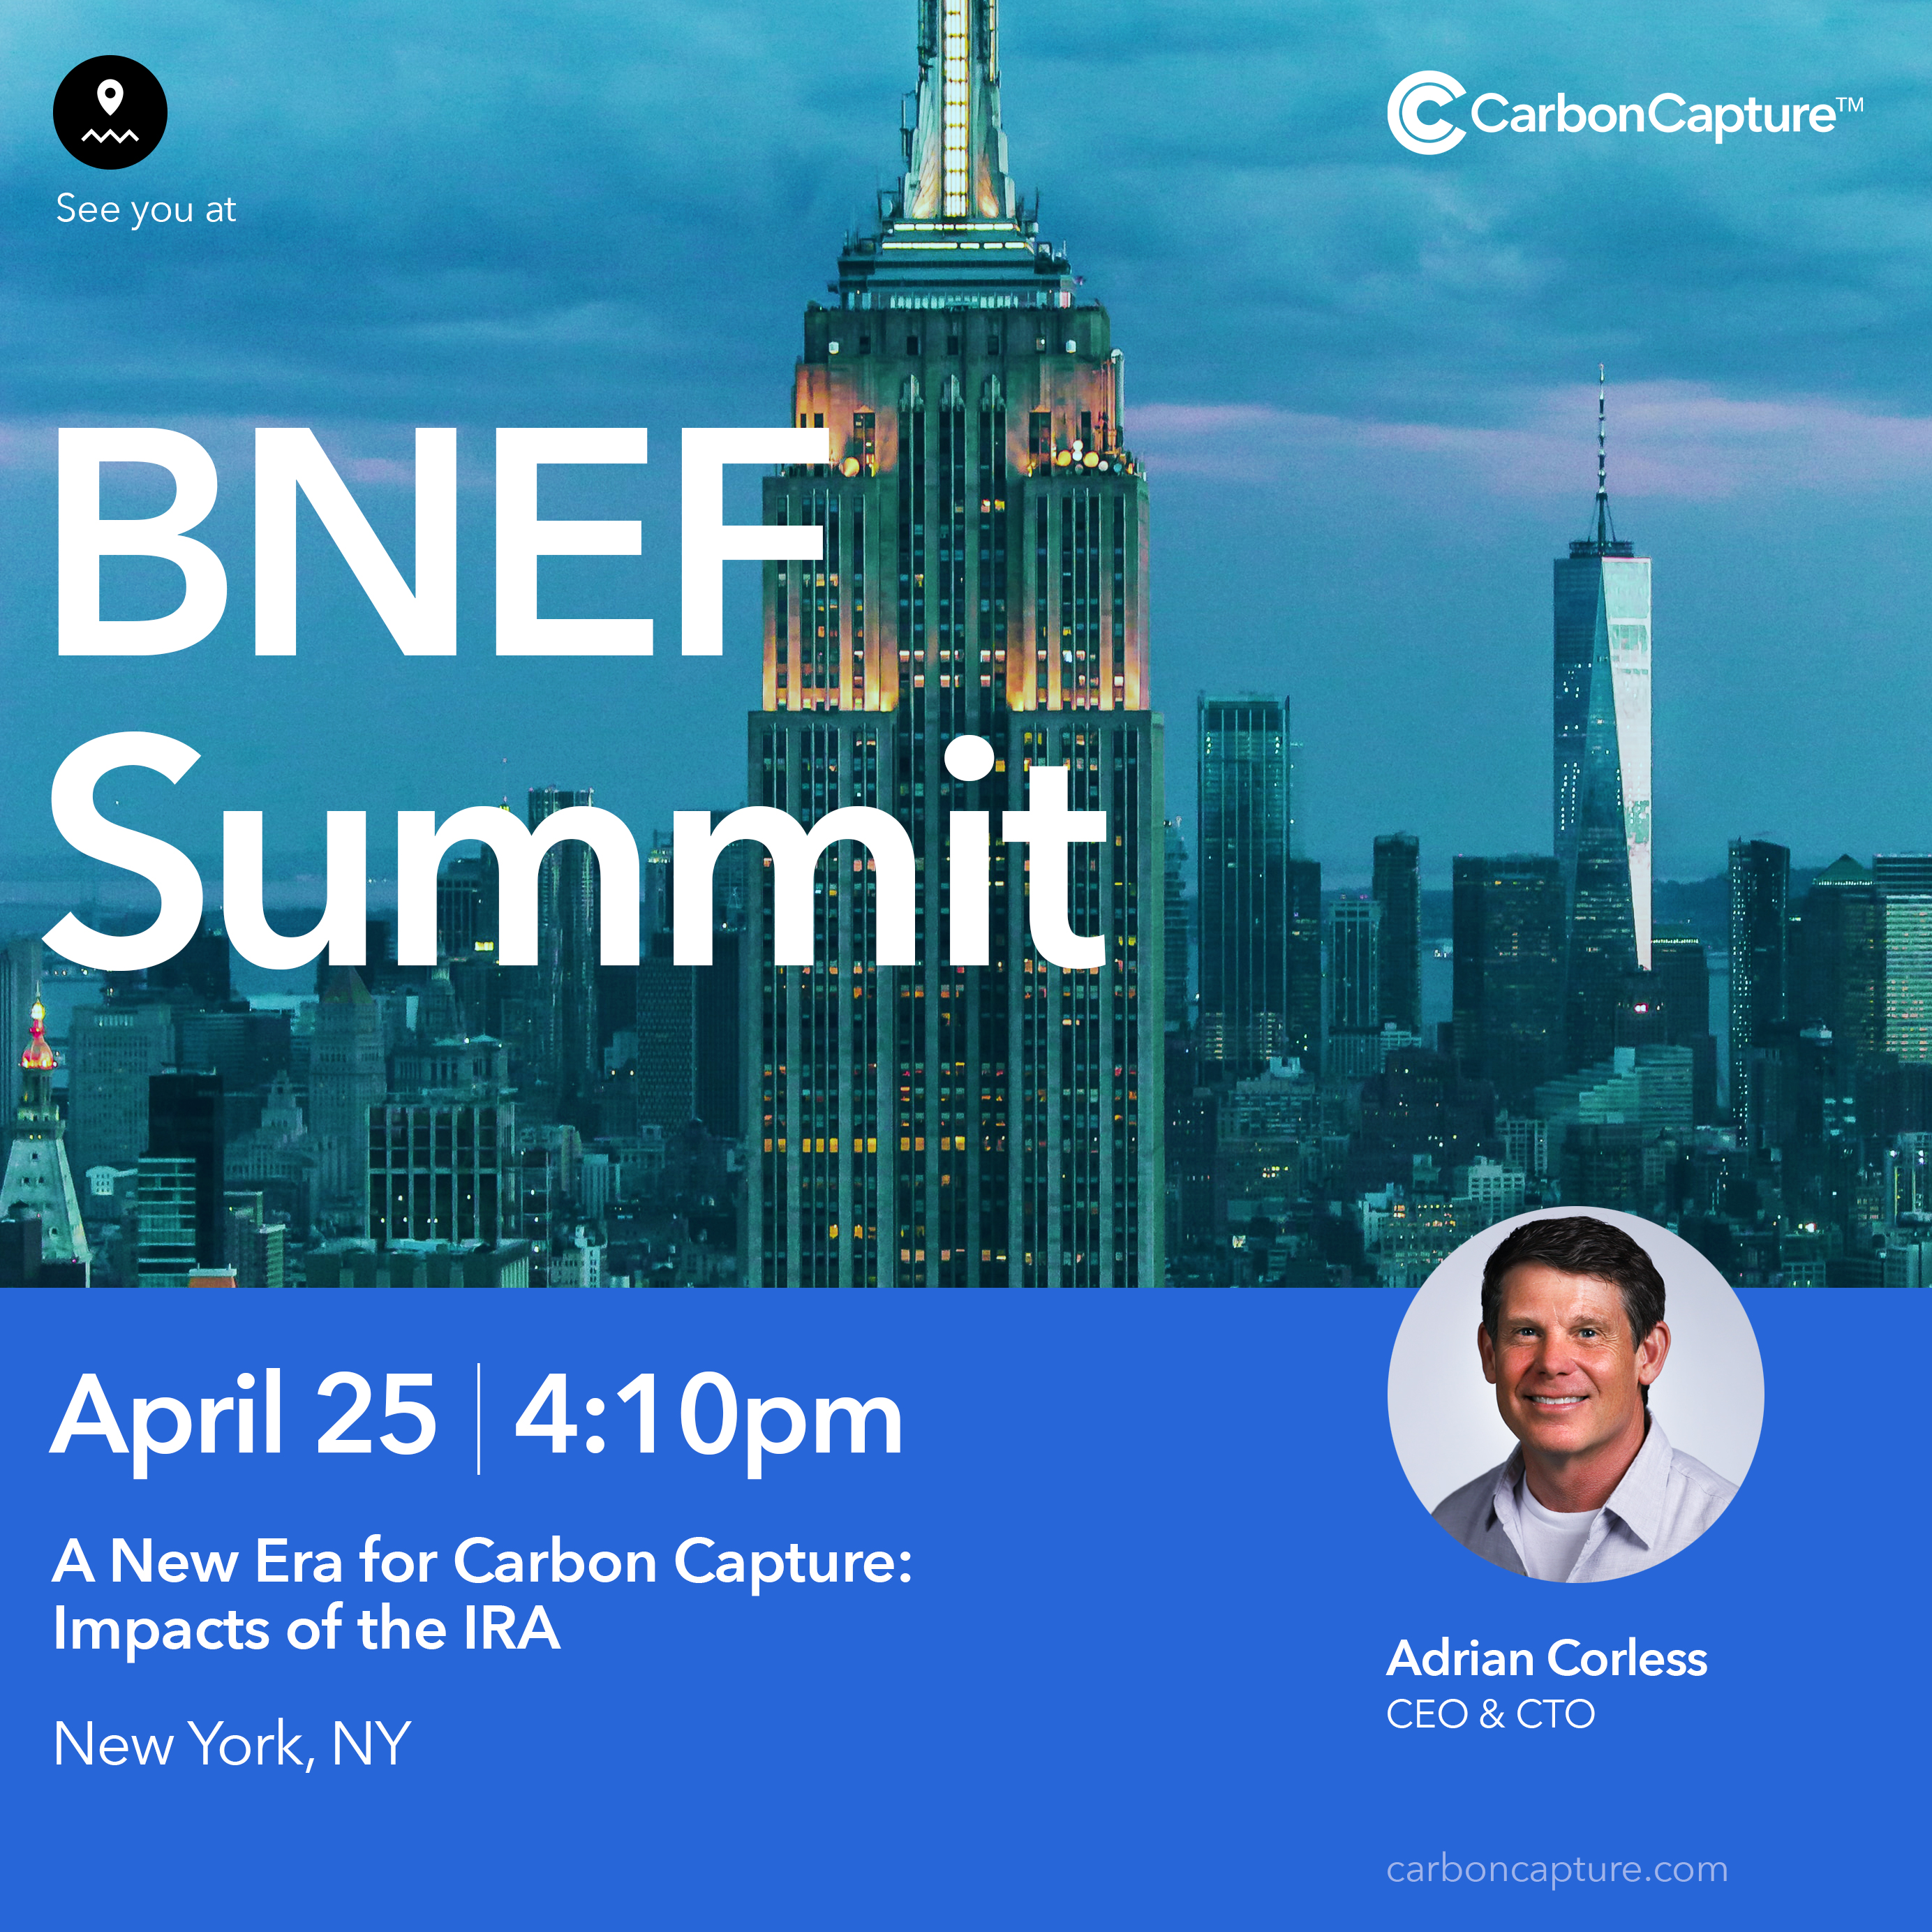 We will be at BNEF Summit